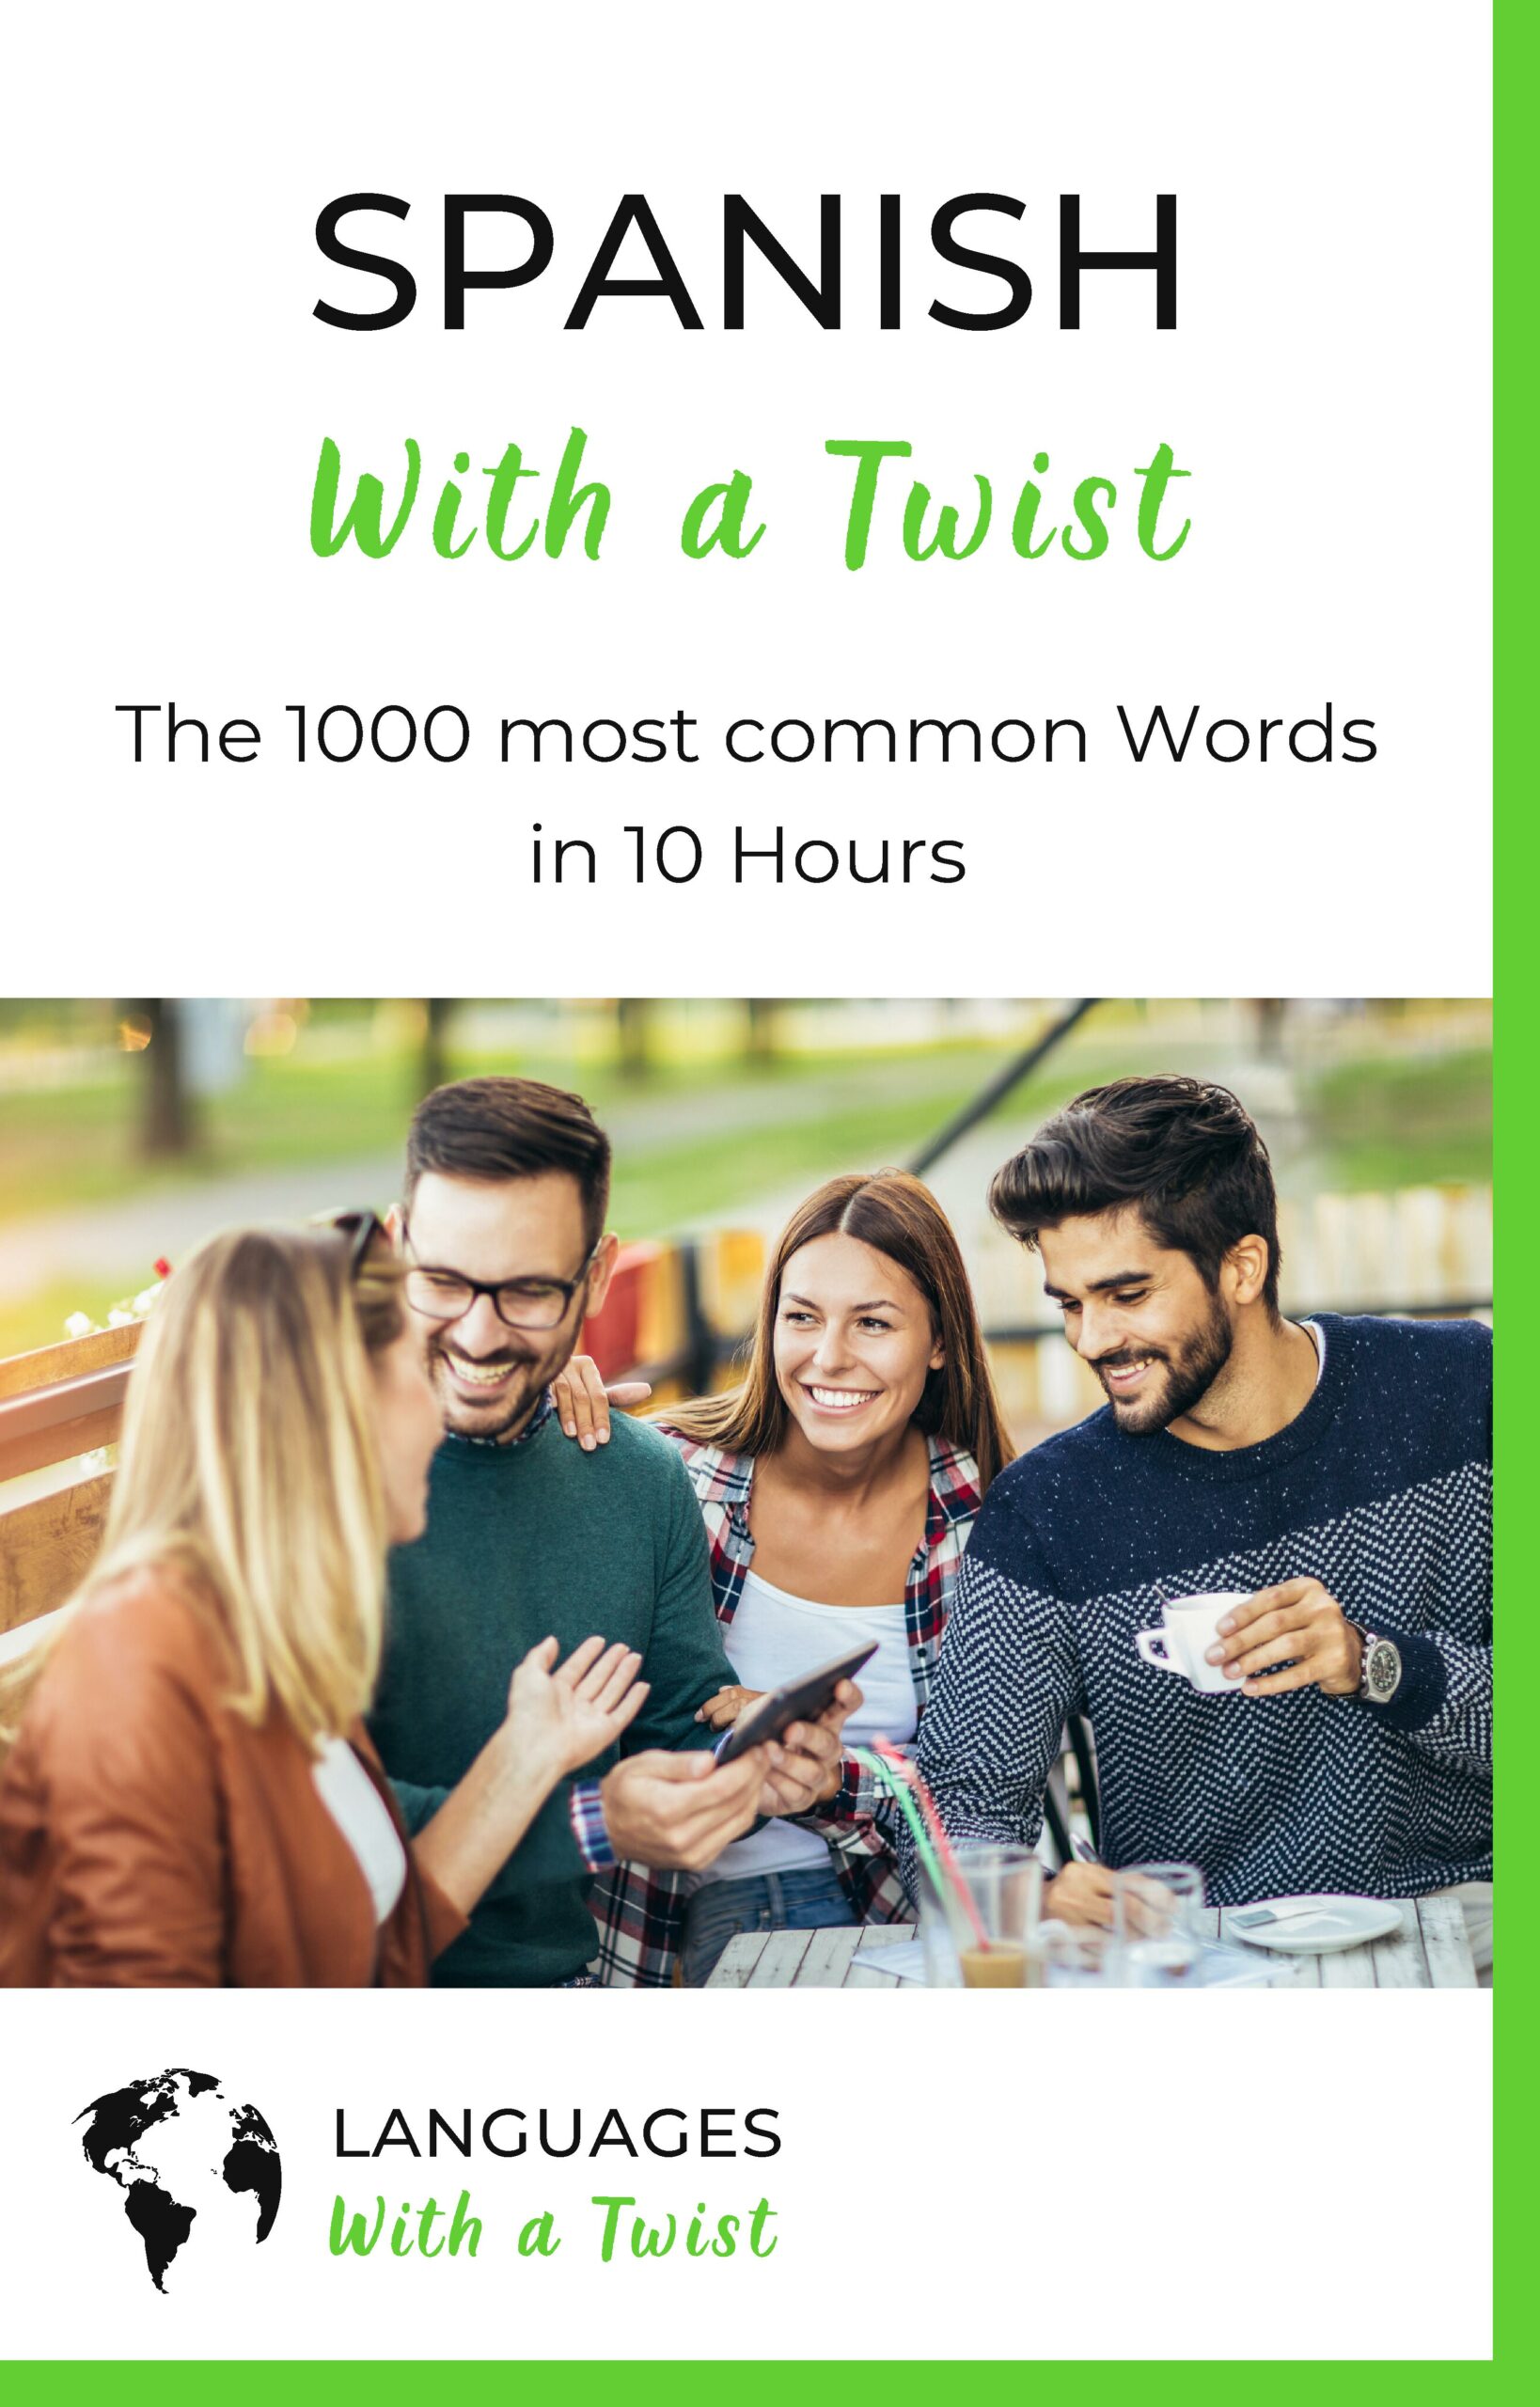 FREE: Spanish with a Twist – The 1000 most common Words in 10 Hours by Languages with a Twist